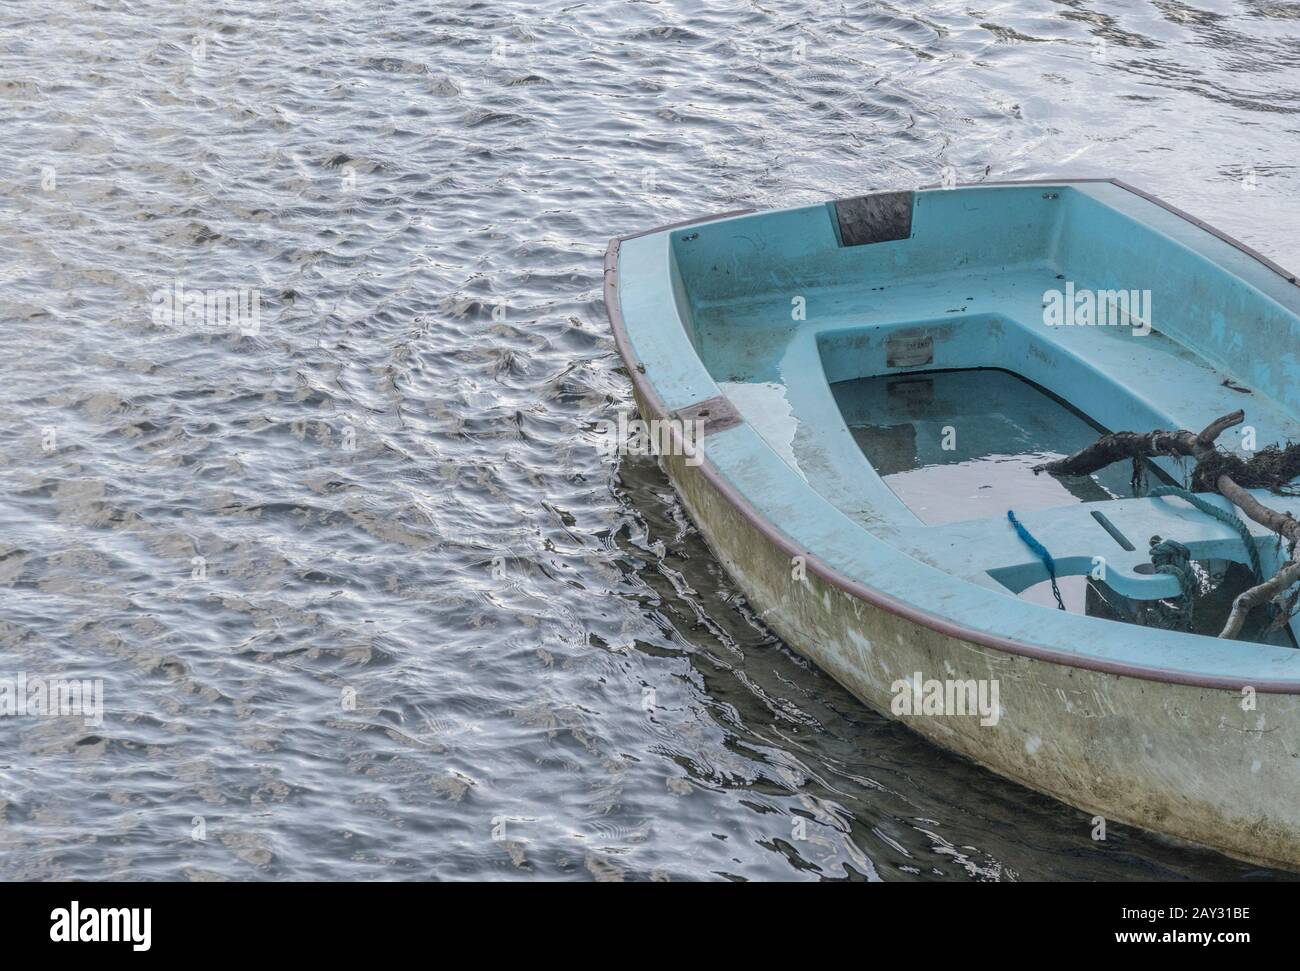 Waterlogged boat for 'sinking ship', 'sink the boat', going down with the ship, organisational failure, crisis management, emergency plan, be prepared Stock Photo